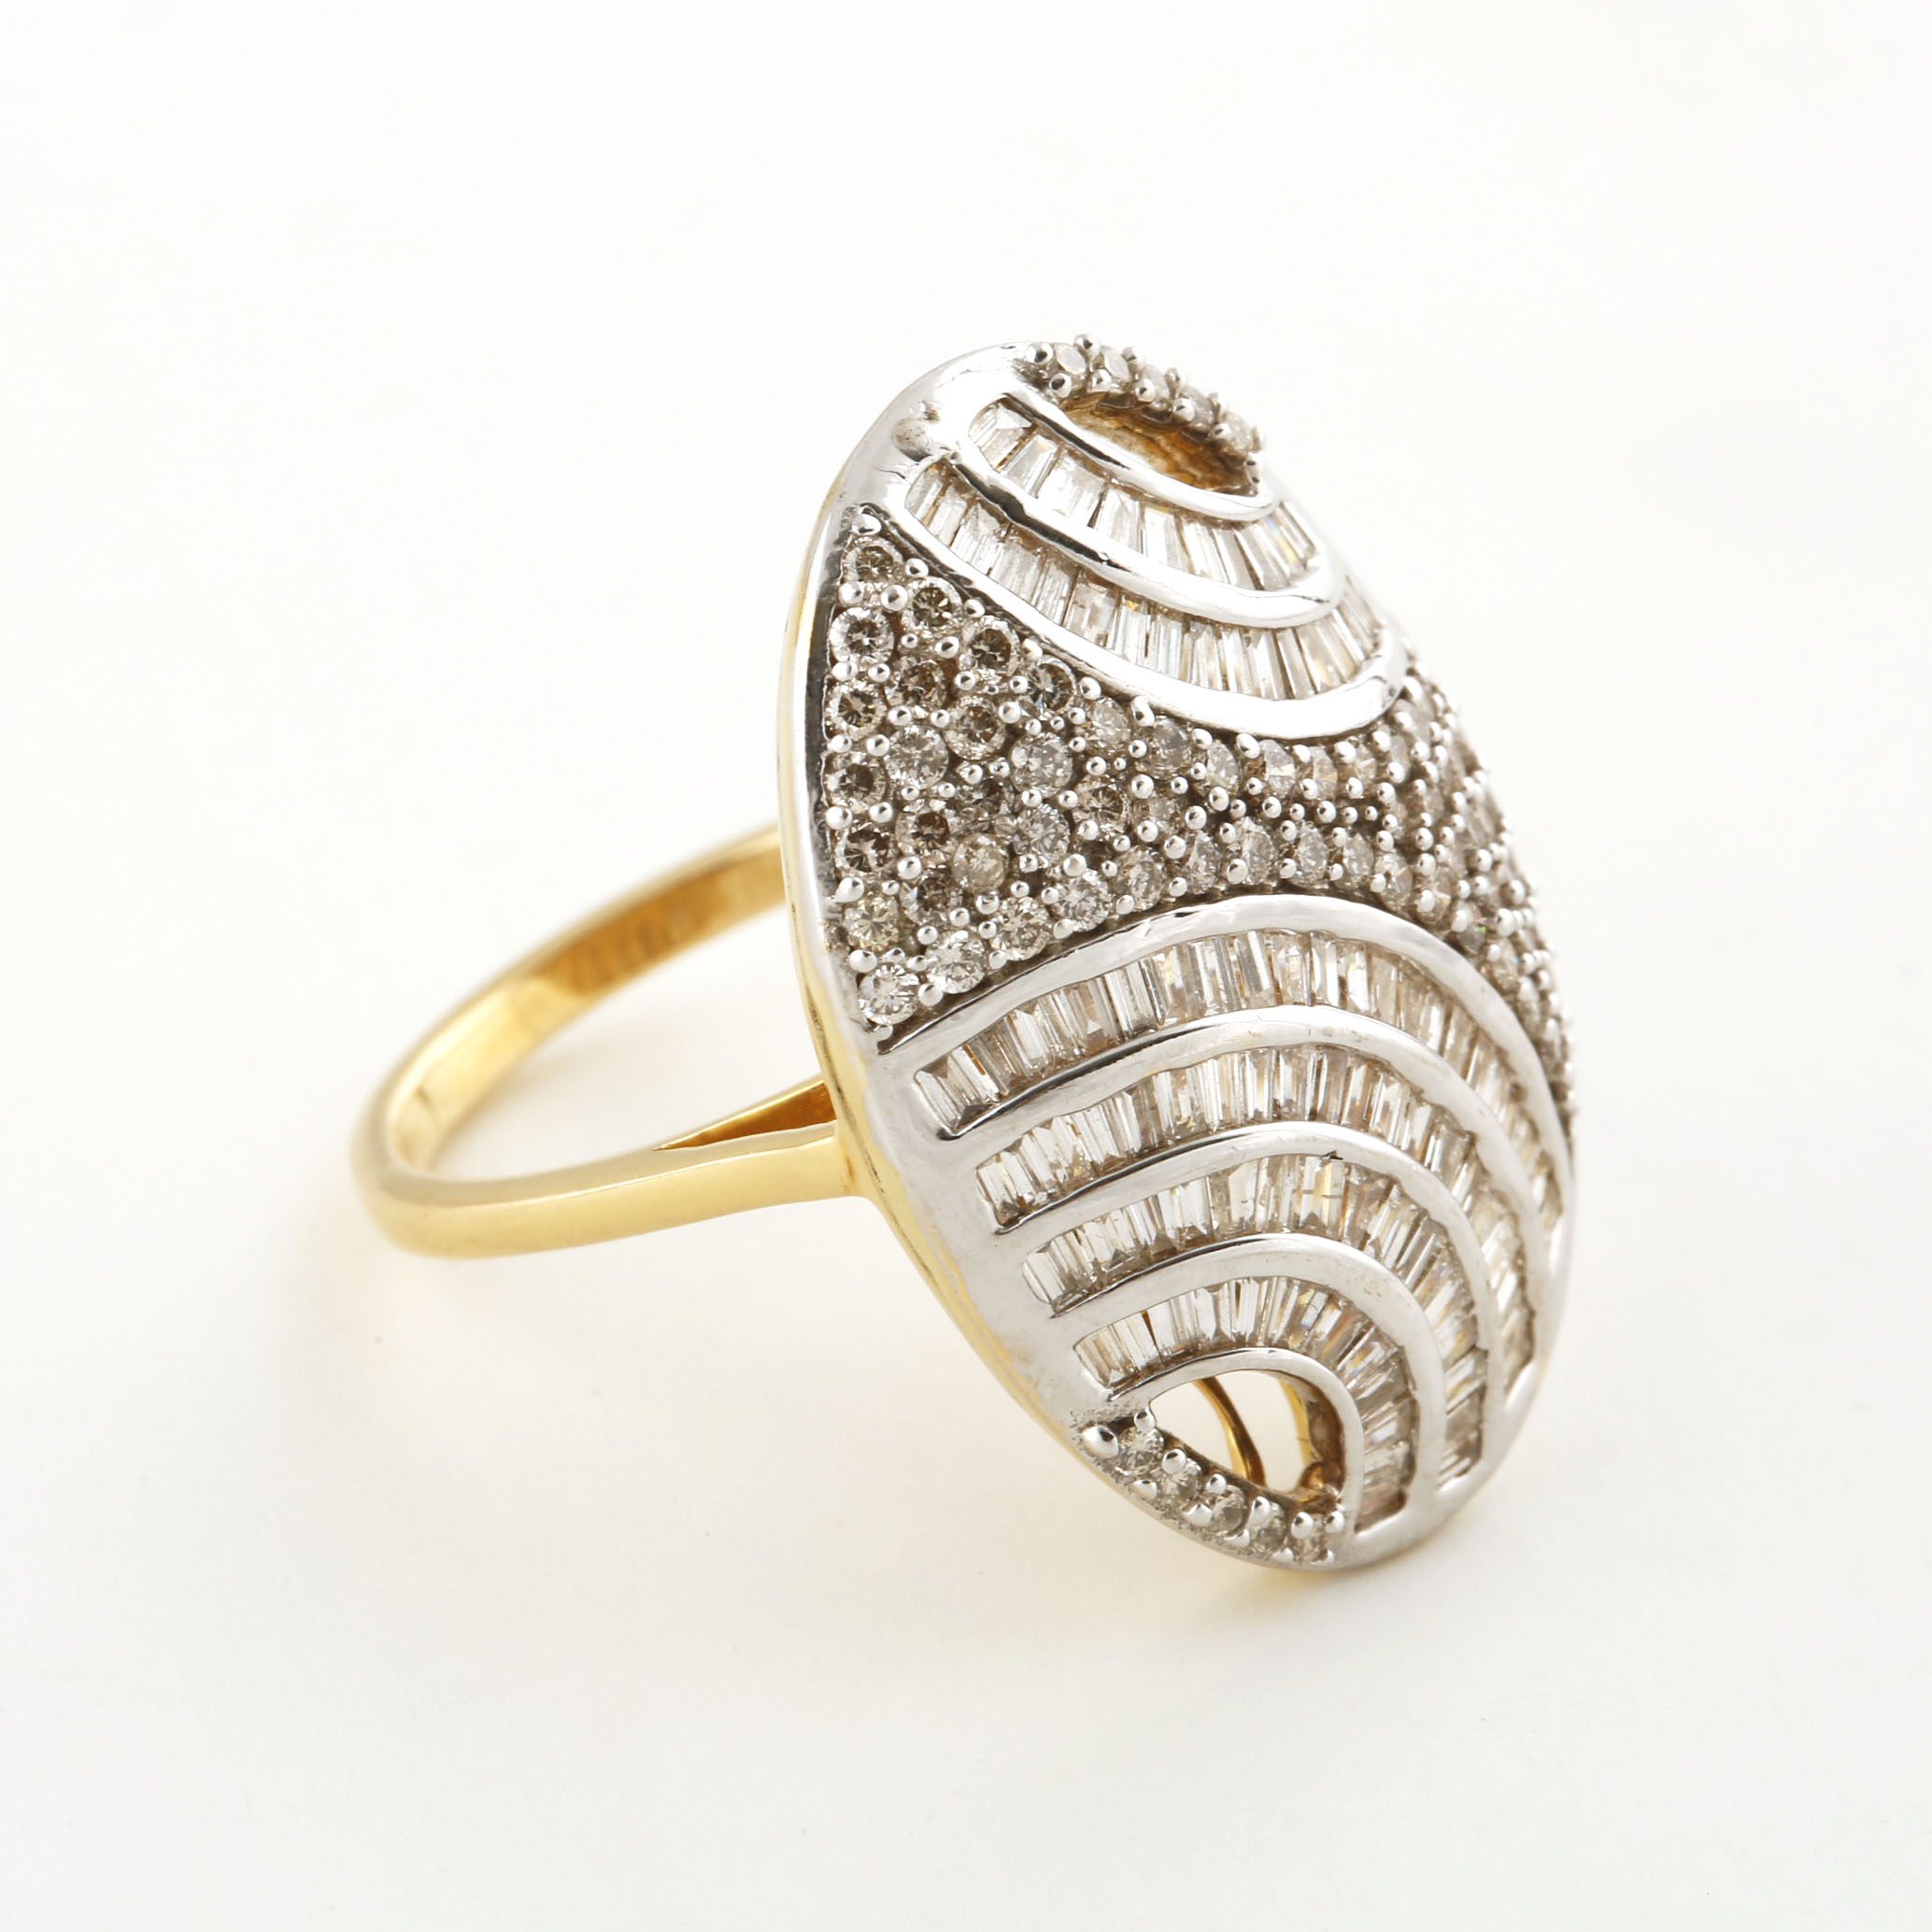 Buy Classic Designs Diamond Ring For Him Online